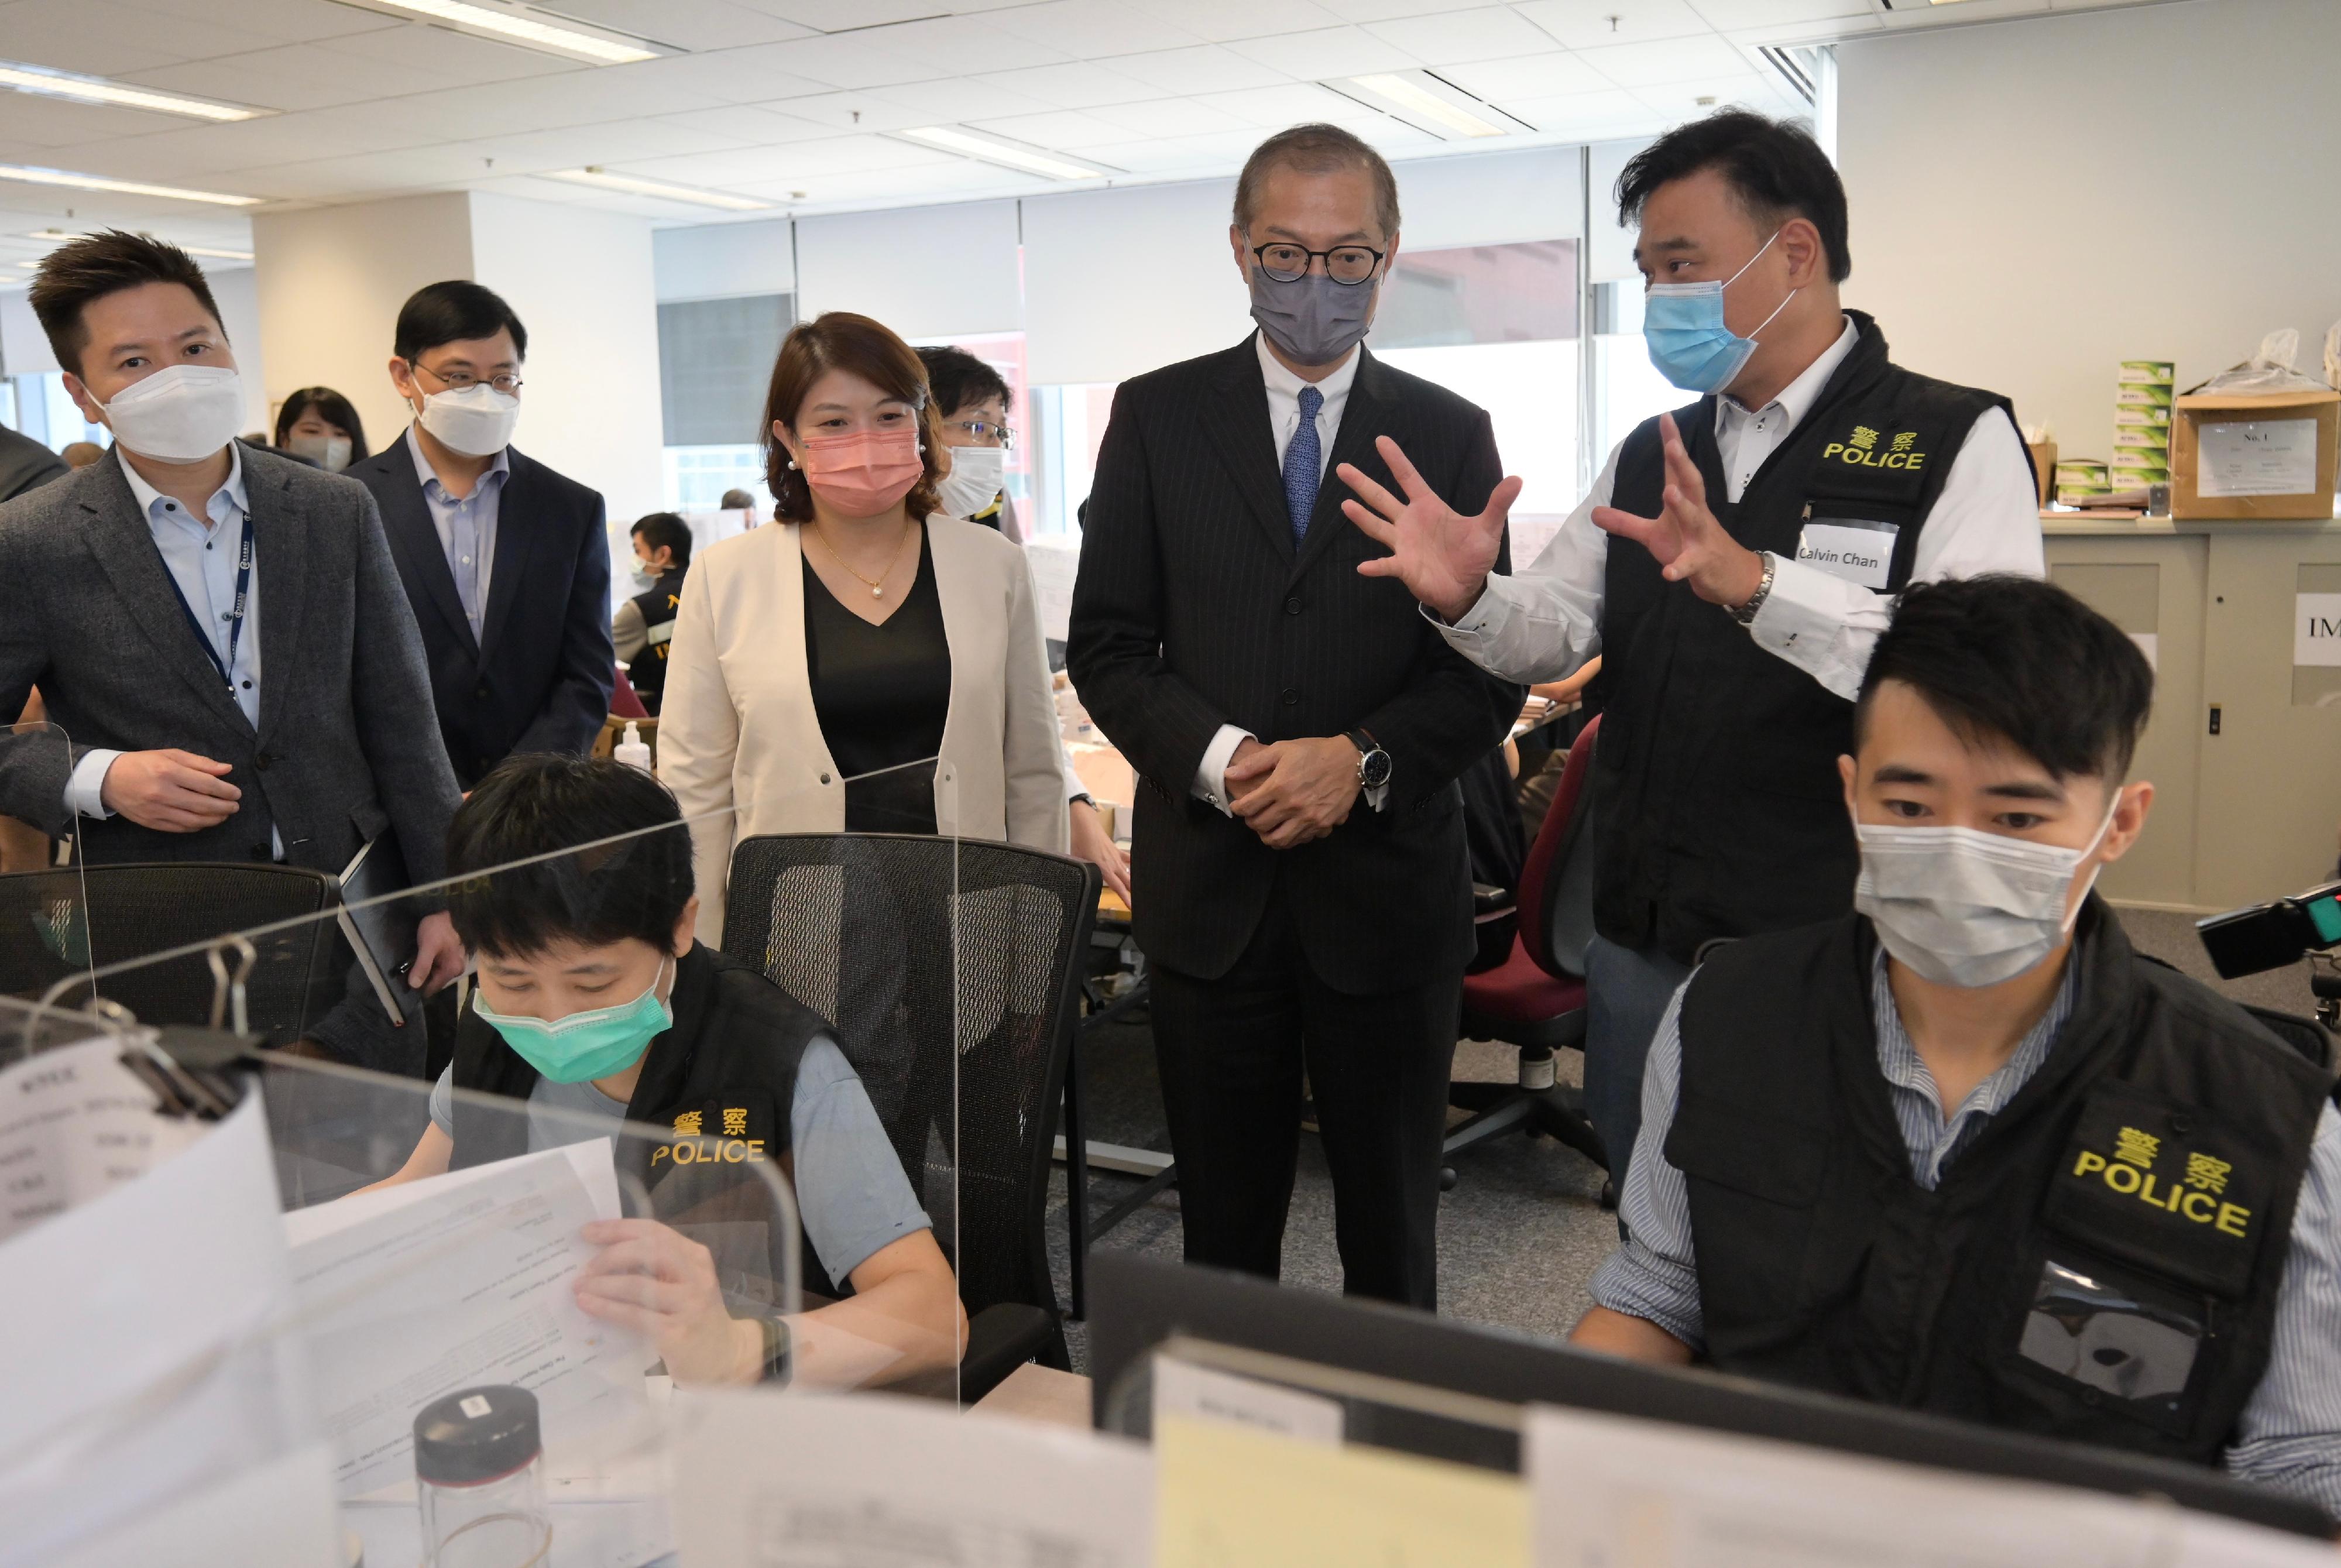 The Secretary for Health, Professor Lo Chung-mau (third right), visits the Contact Tracing Office of the Centre for Health Protection of the Department of Health today (August 3) and receives a briefing by frontline staff on the work on contact tracing of close contacts of COVID-19 patients. Also present are the Under Secretary for Health, Dr Libby Lee (fourth right), and the Controller of the Centre for Health Protection of the Department of Health, Dr Edwin Tsui (first left).